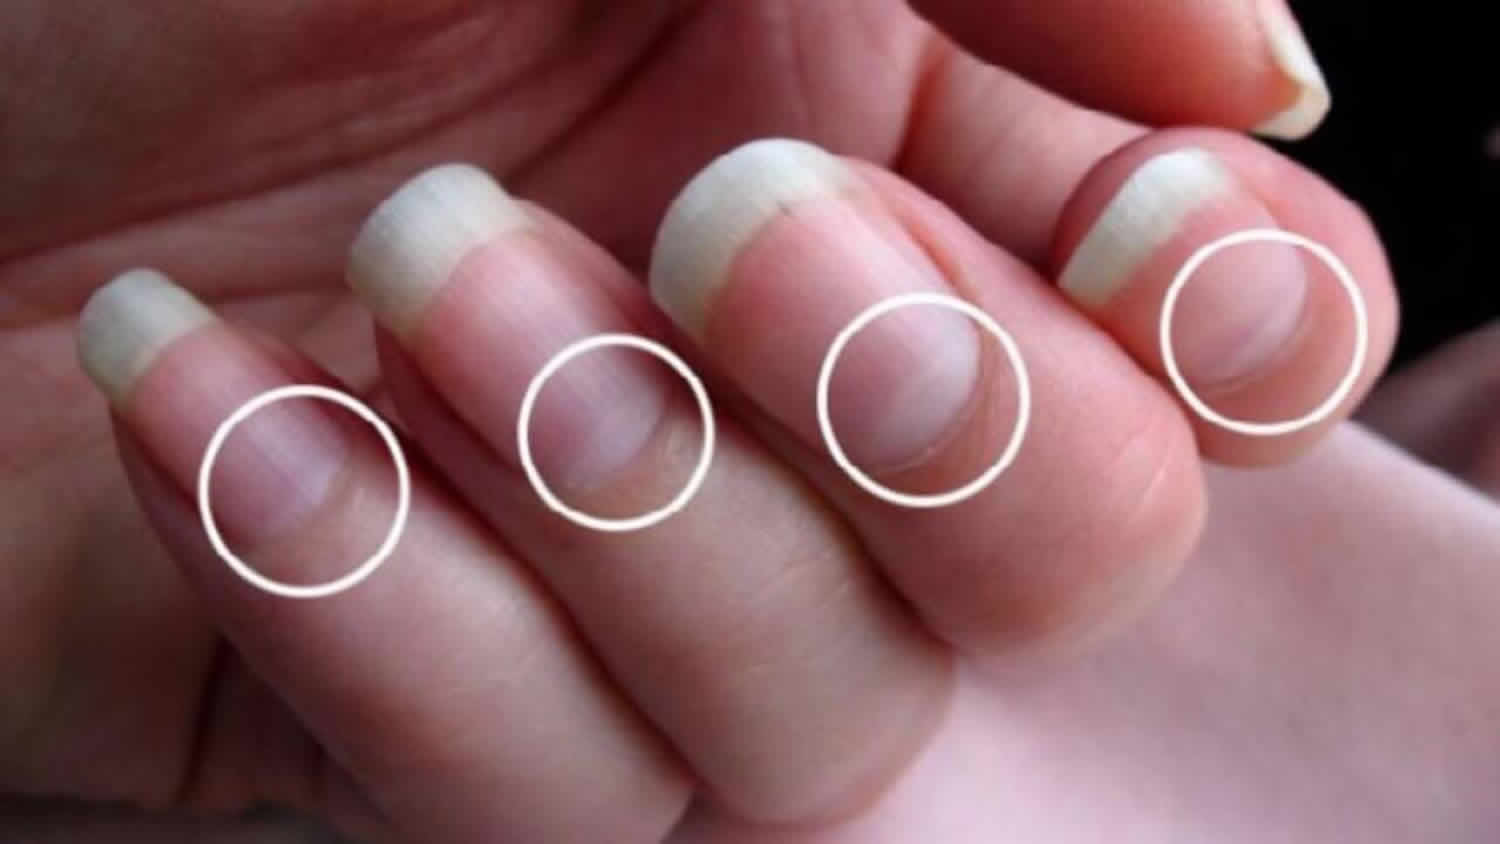 I only have a lunula on my right thumb, should I be worried that I could  not find it on my other fingers? - Quora